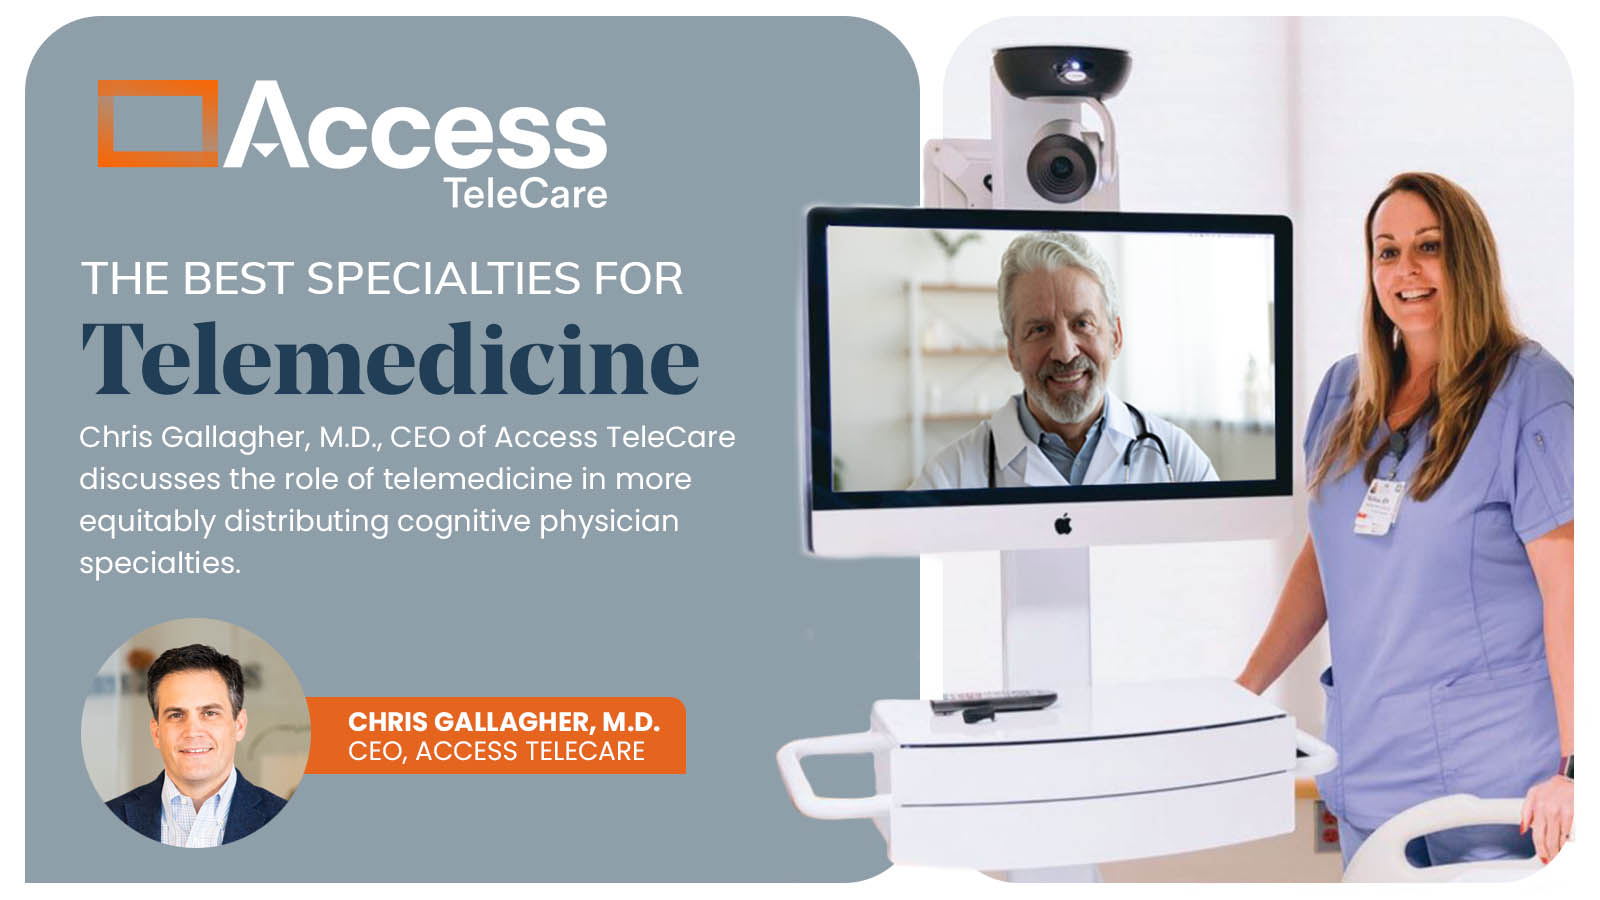 Access TeleCare president/CEO, Dr. Chris Gallagher, explores telemedicine's role in equitable distribution of cognitive specialties